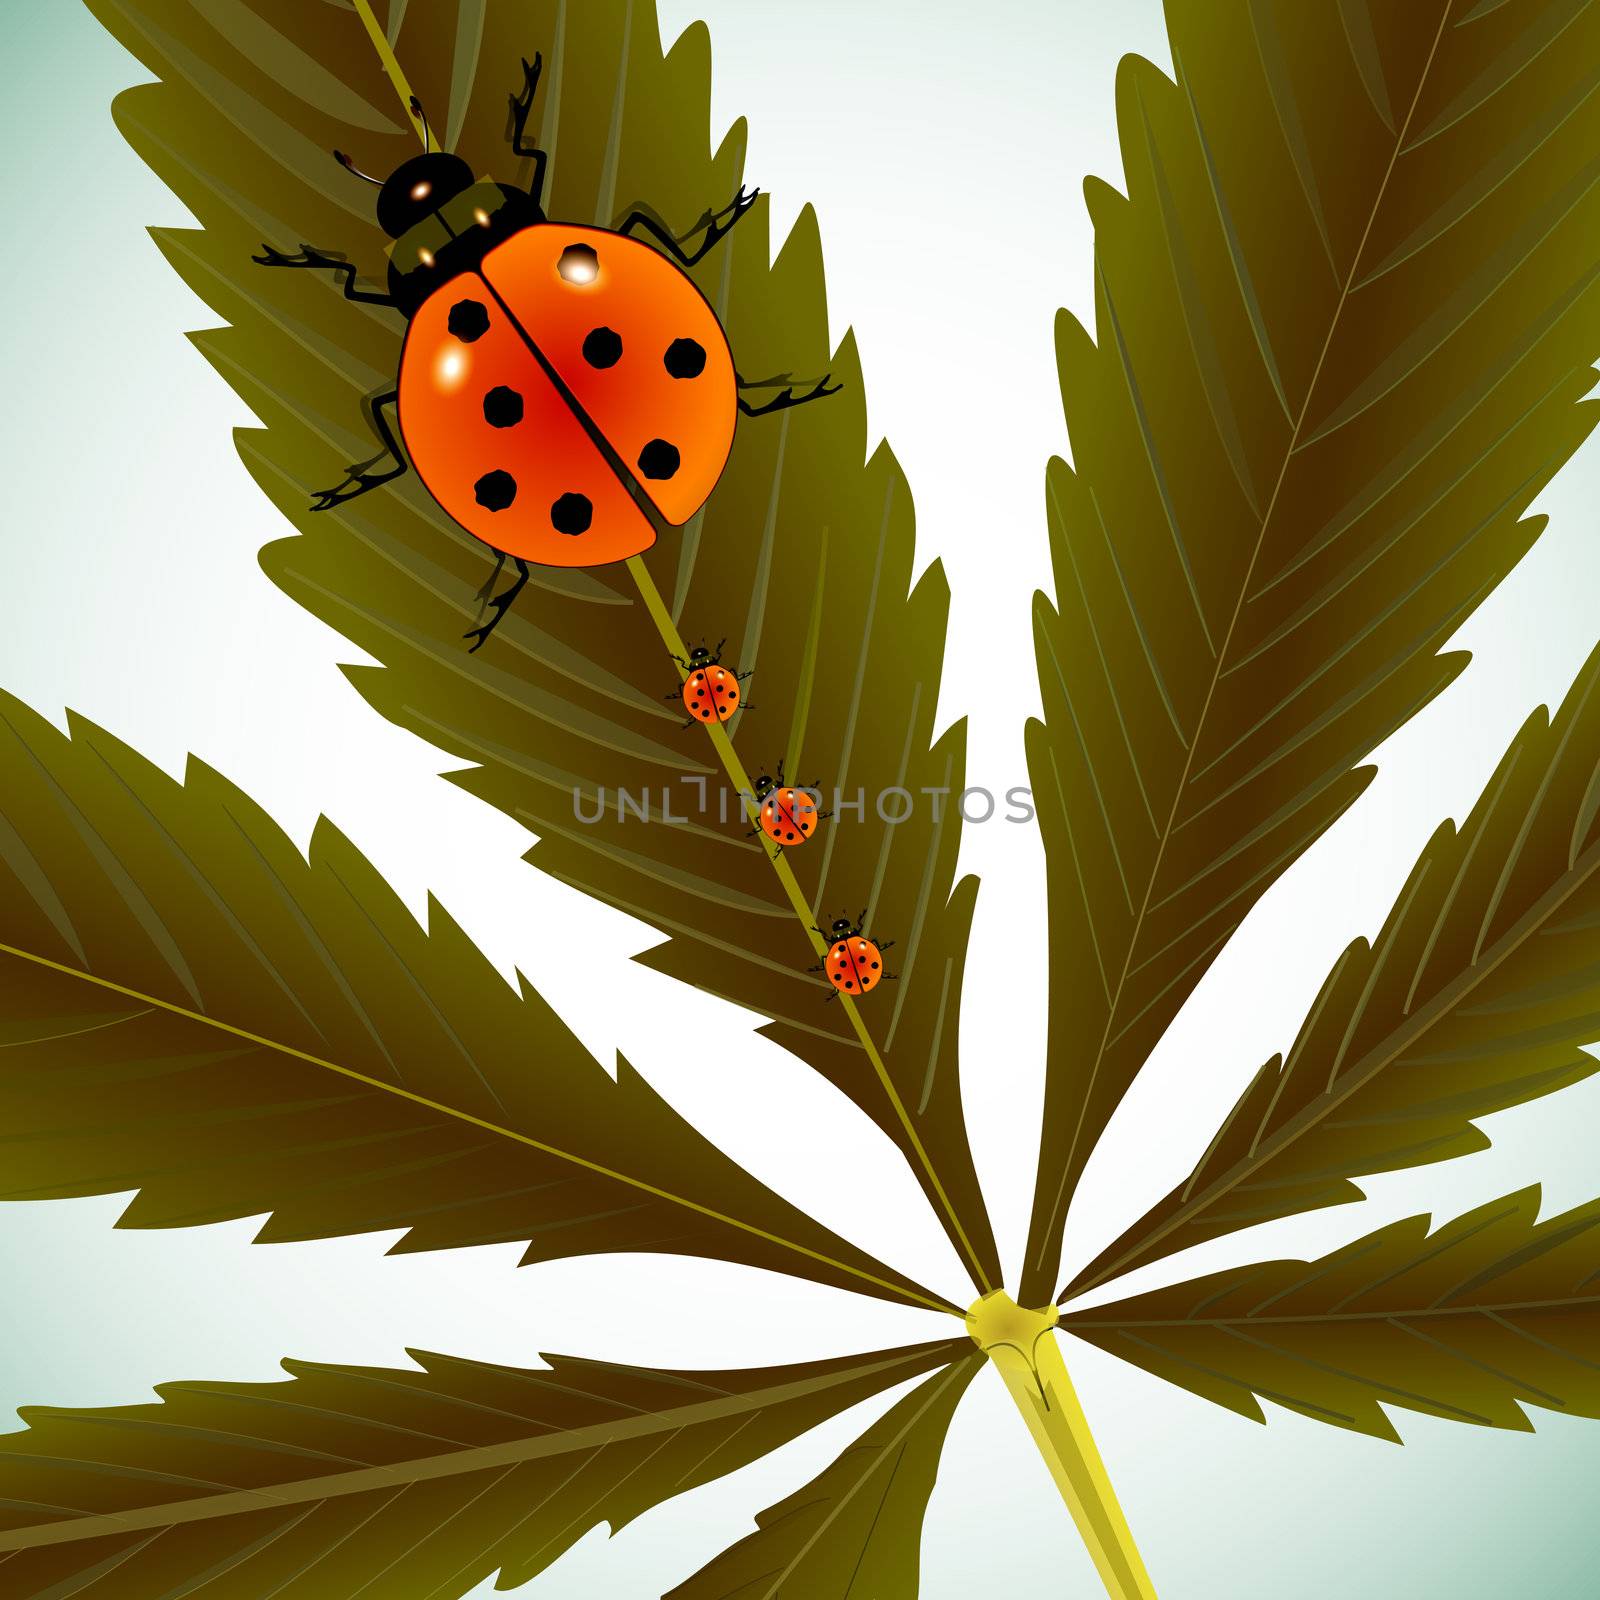 ladybugs on cannabis leaf, abstract vector art illustration; image contains clipping mask and transparency